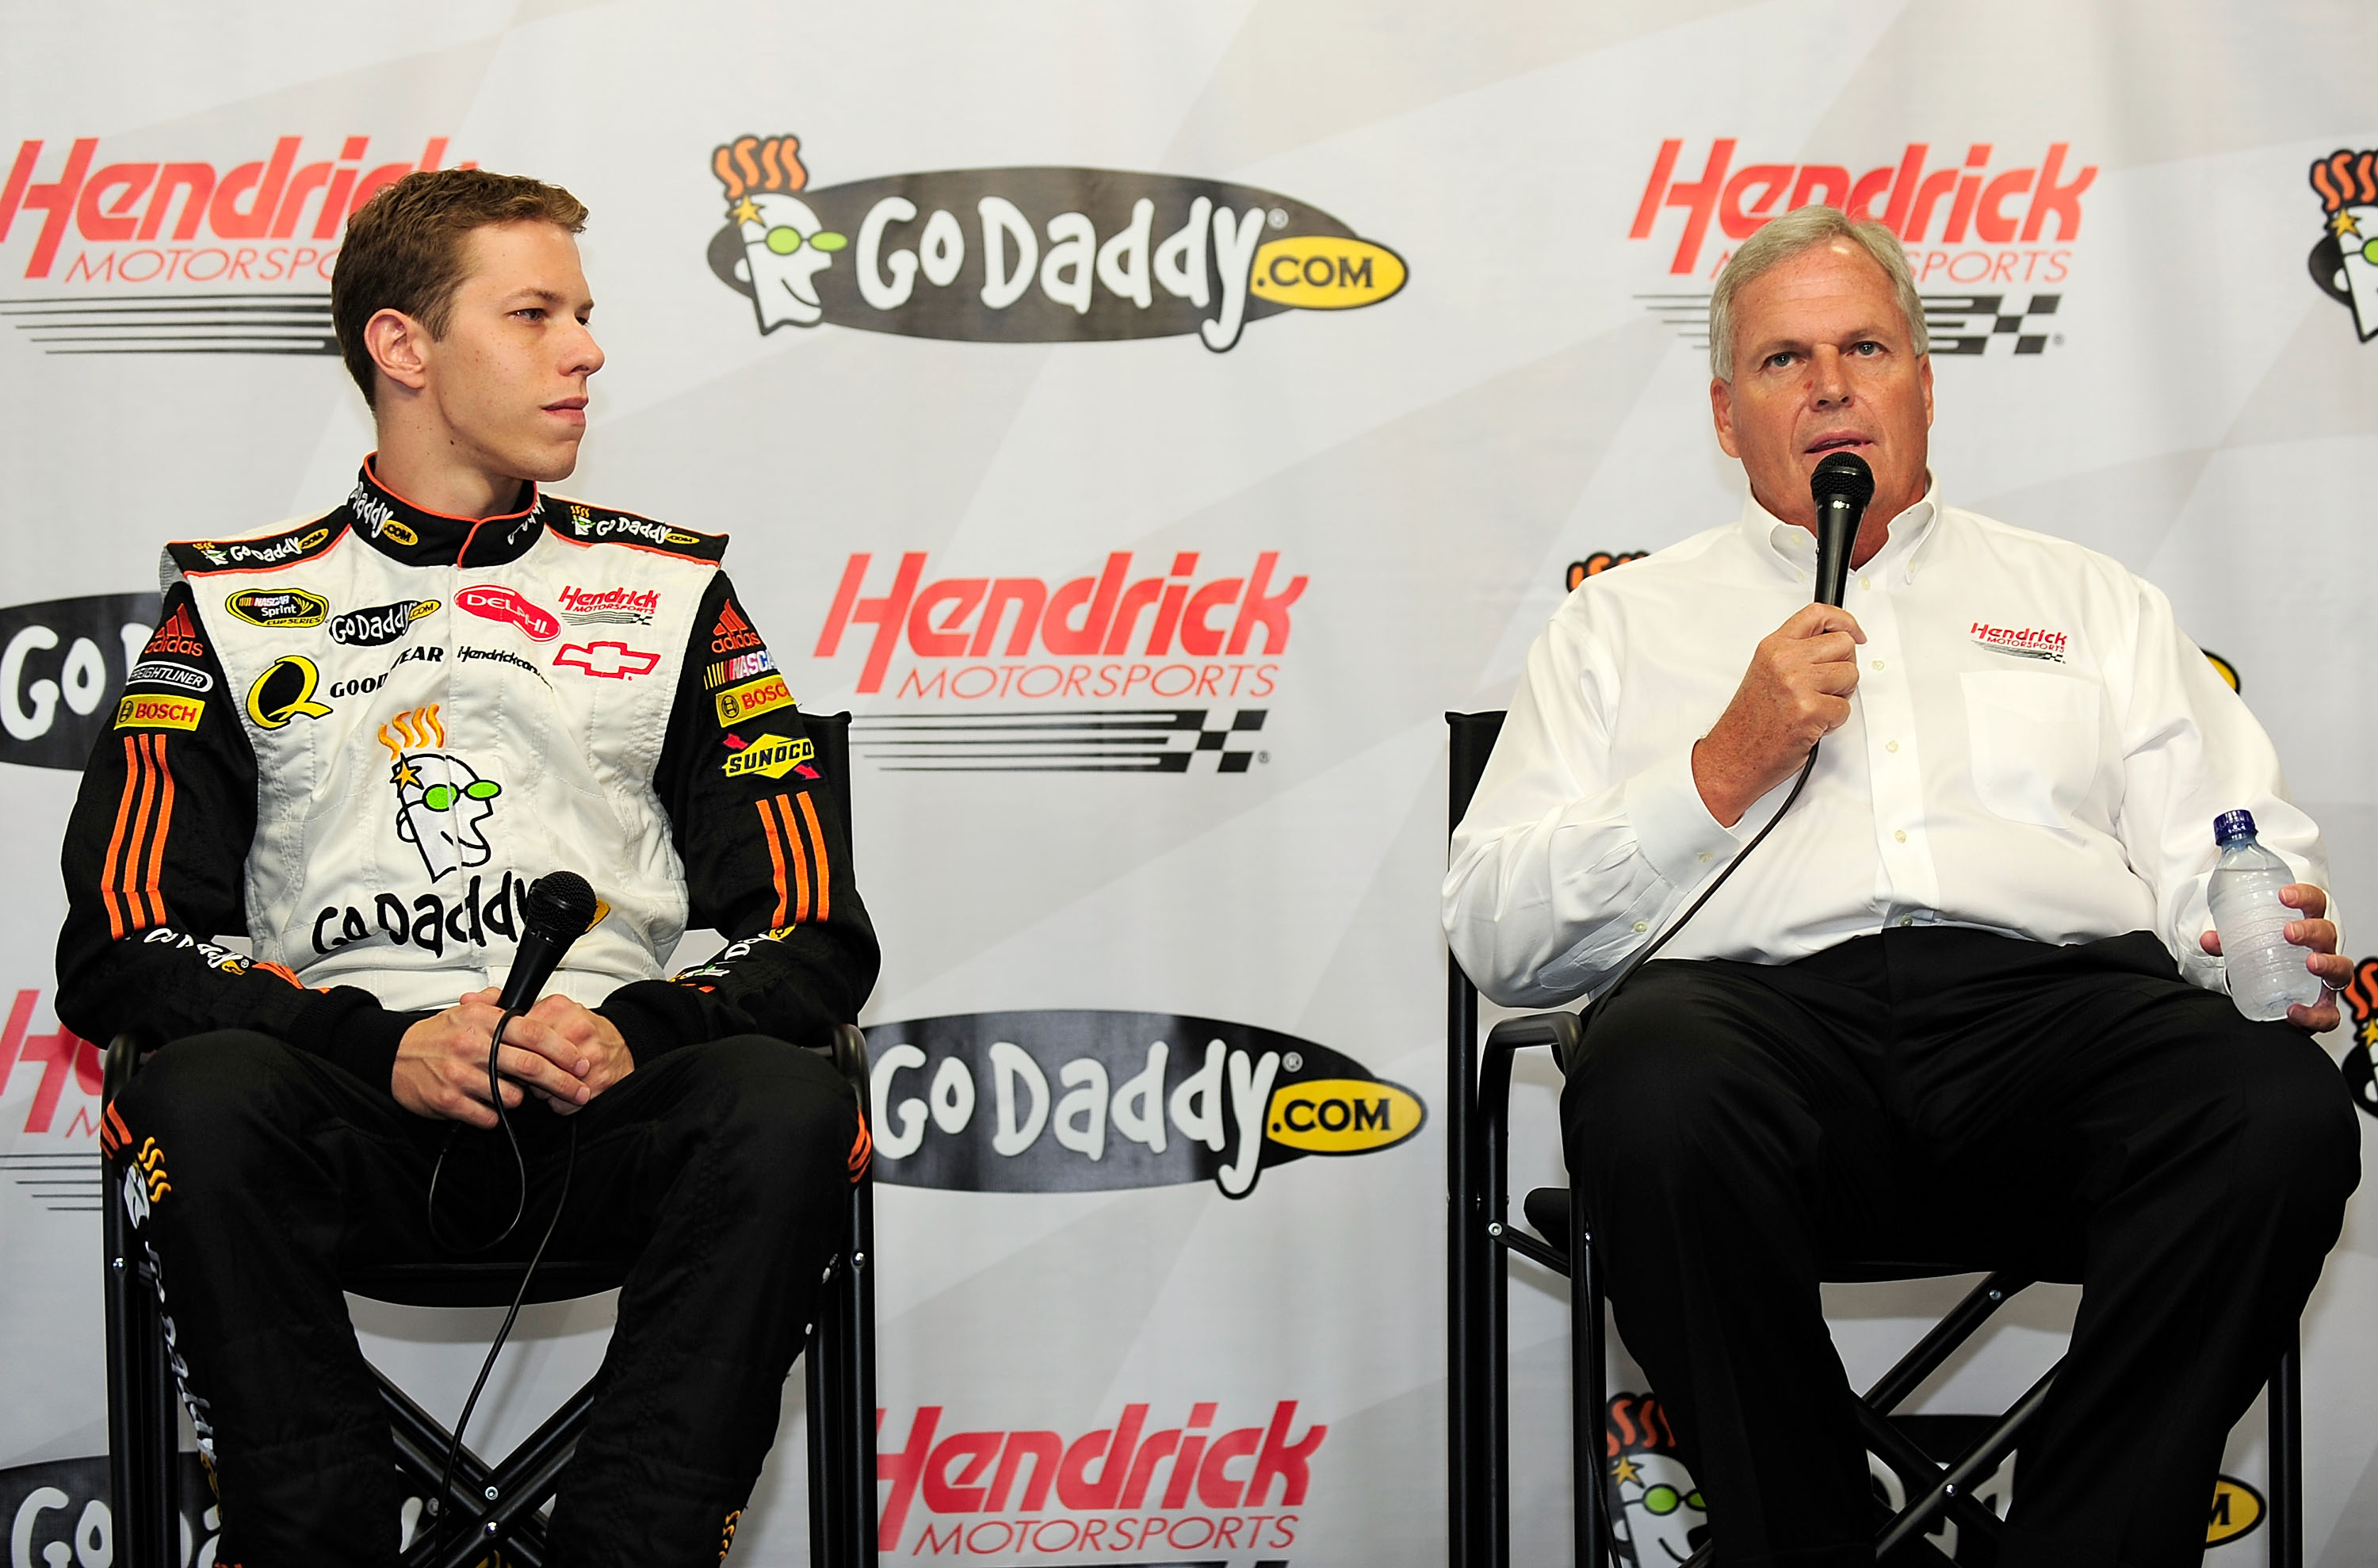 CONCORD, NC - SEPTEMBER 23: Brad Keselowski and Rick Hendrick speak with the media to announce Keselowski will make his Sprint Cup debut Oct 11, at Lowes Motor Speedway in the Hendrick Motorsport #25 during NASCAR Sprint Cup testing at Lowes Motor Speedway on September 23, 2008 in Concord, North Carolina. (Photo by Rusty Jarrett/Getty Images) | Getty Images